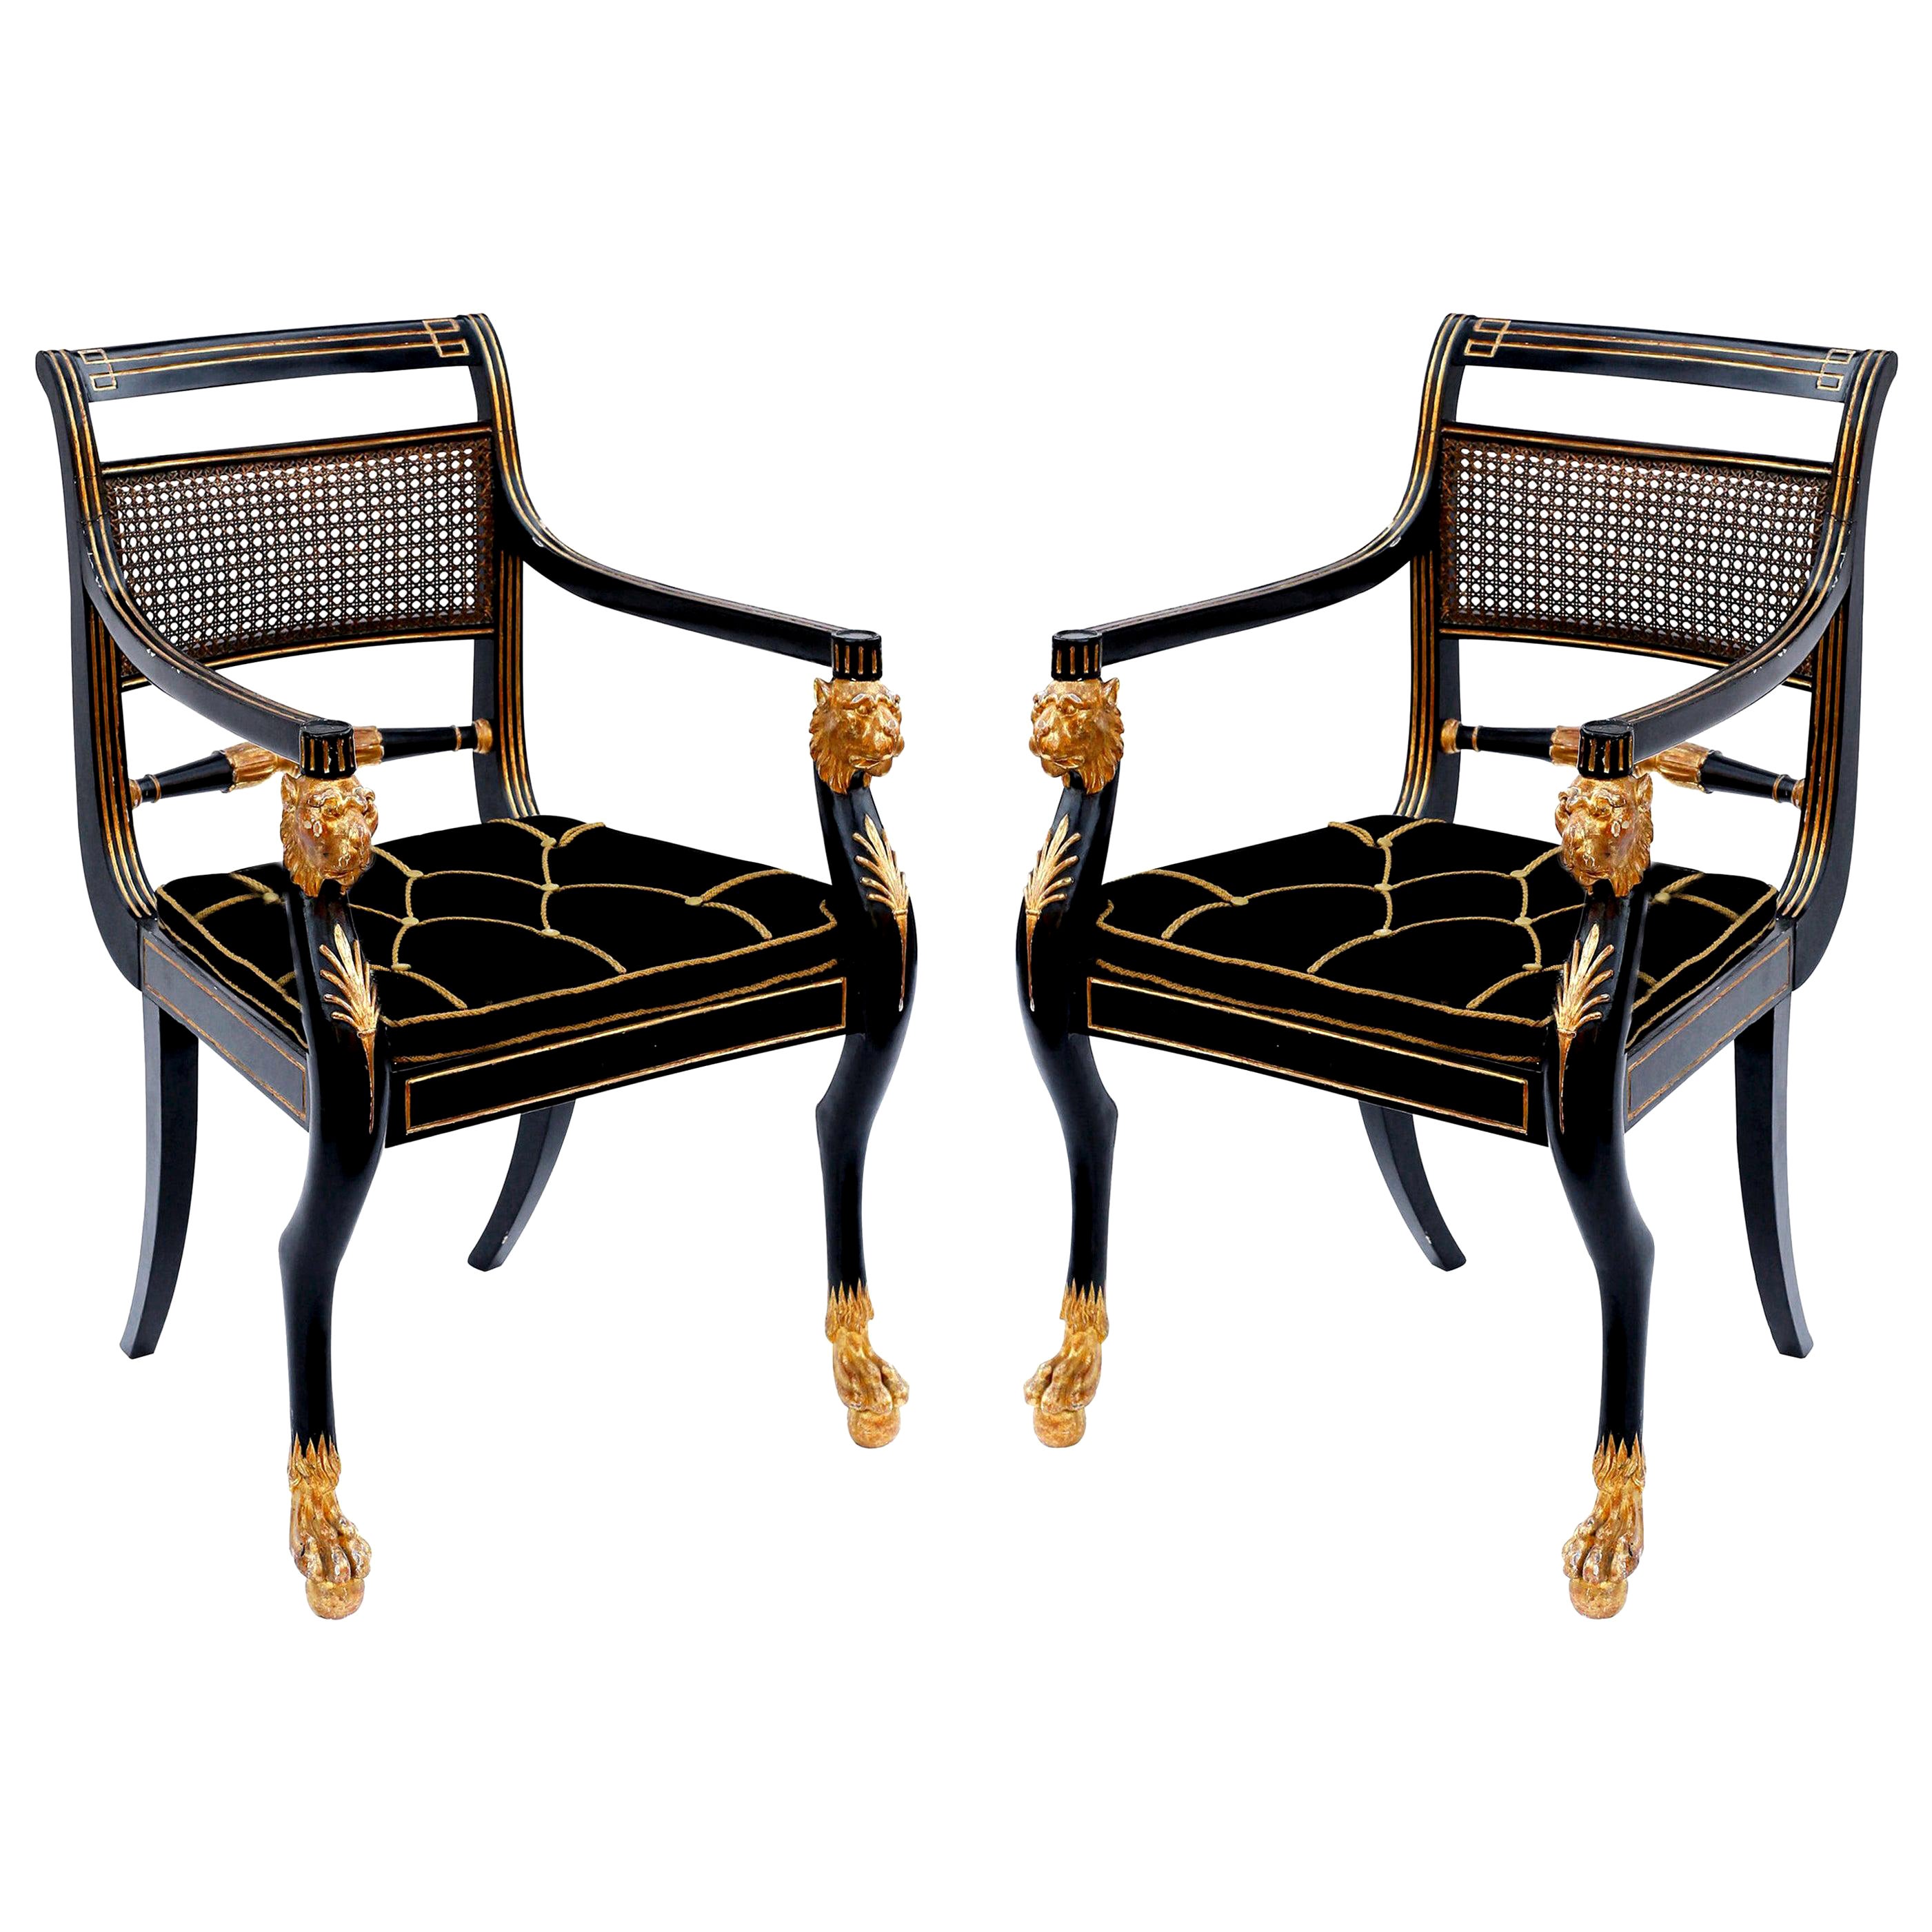 Pair of Early 19th Century English Parcel-Gilt Armchairs Attributed to Gillows